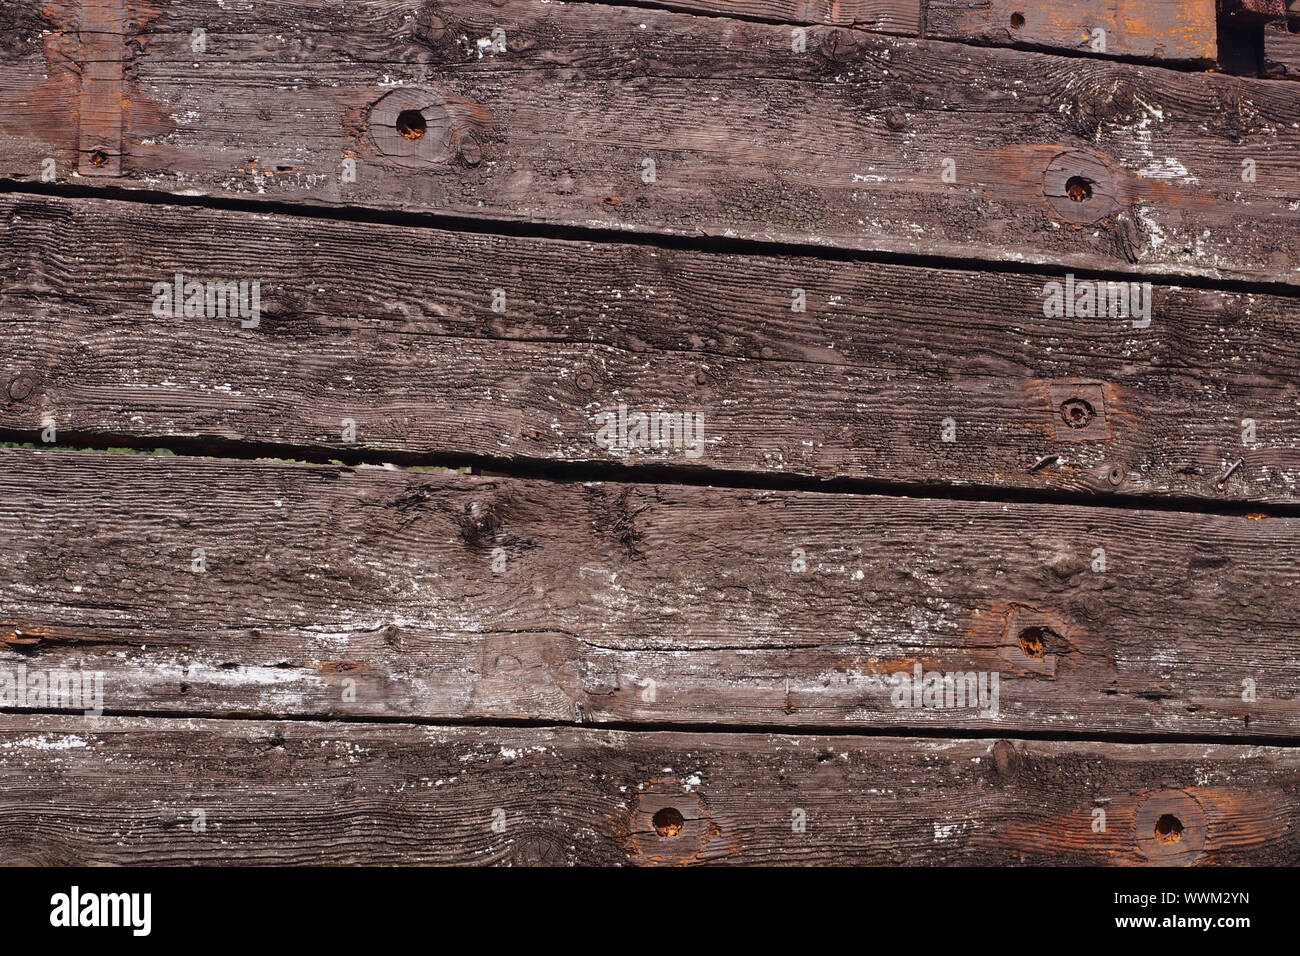 A close up view of reclaimed timber reused to build a timber barn showing the old bolt holes, the grain and thickness and quality of the timber boards Stock Photo